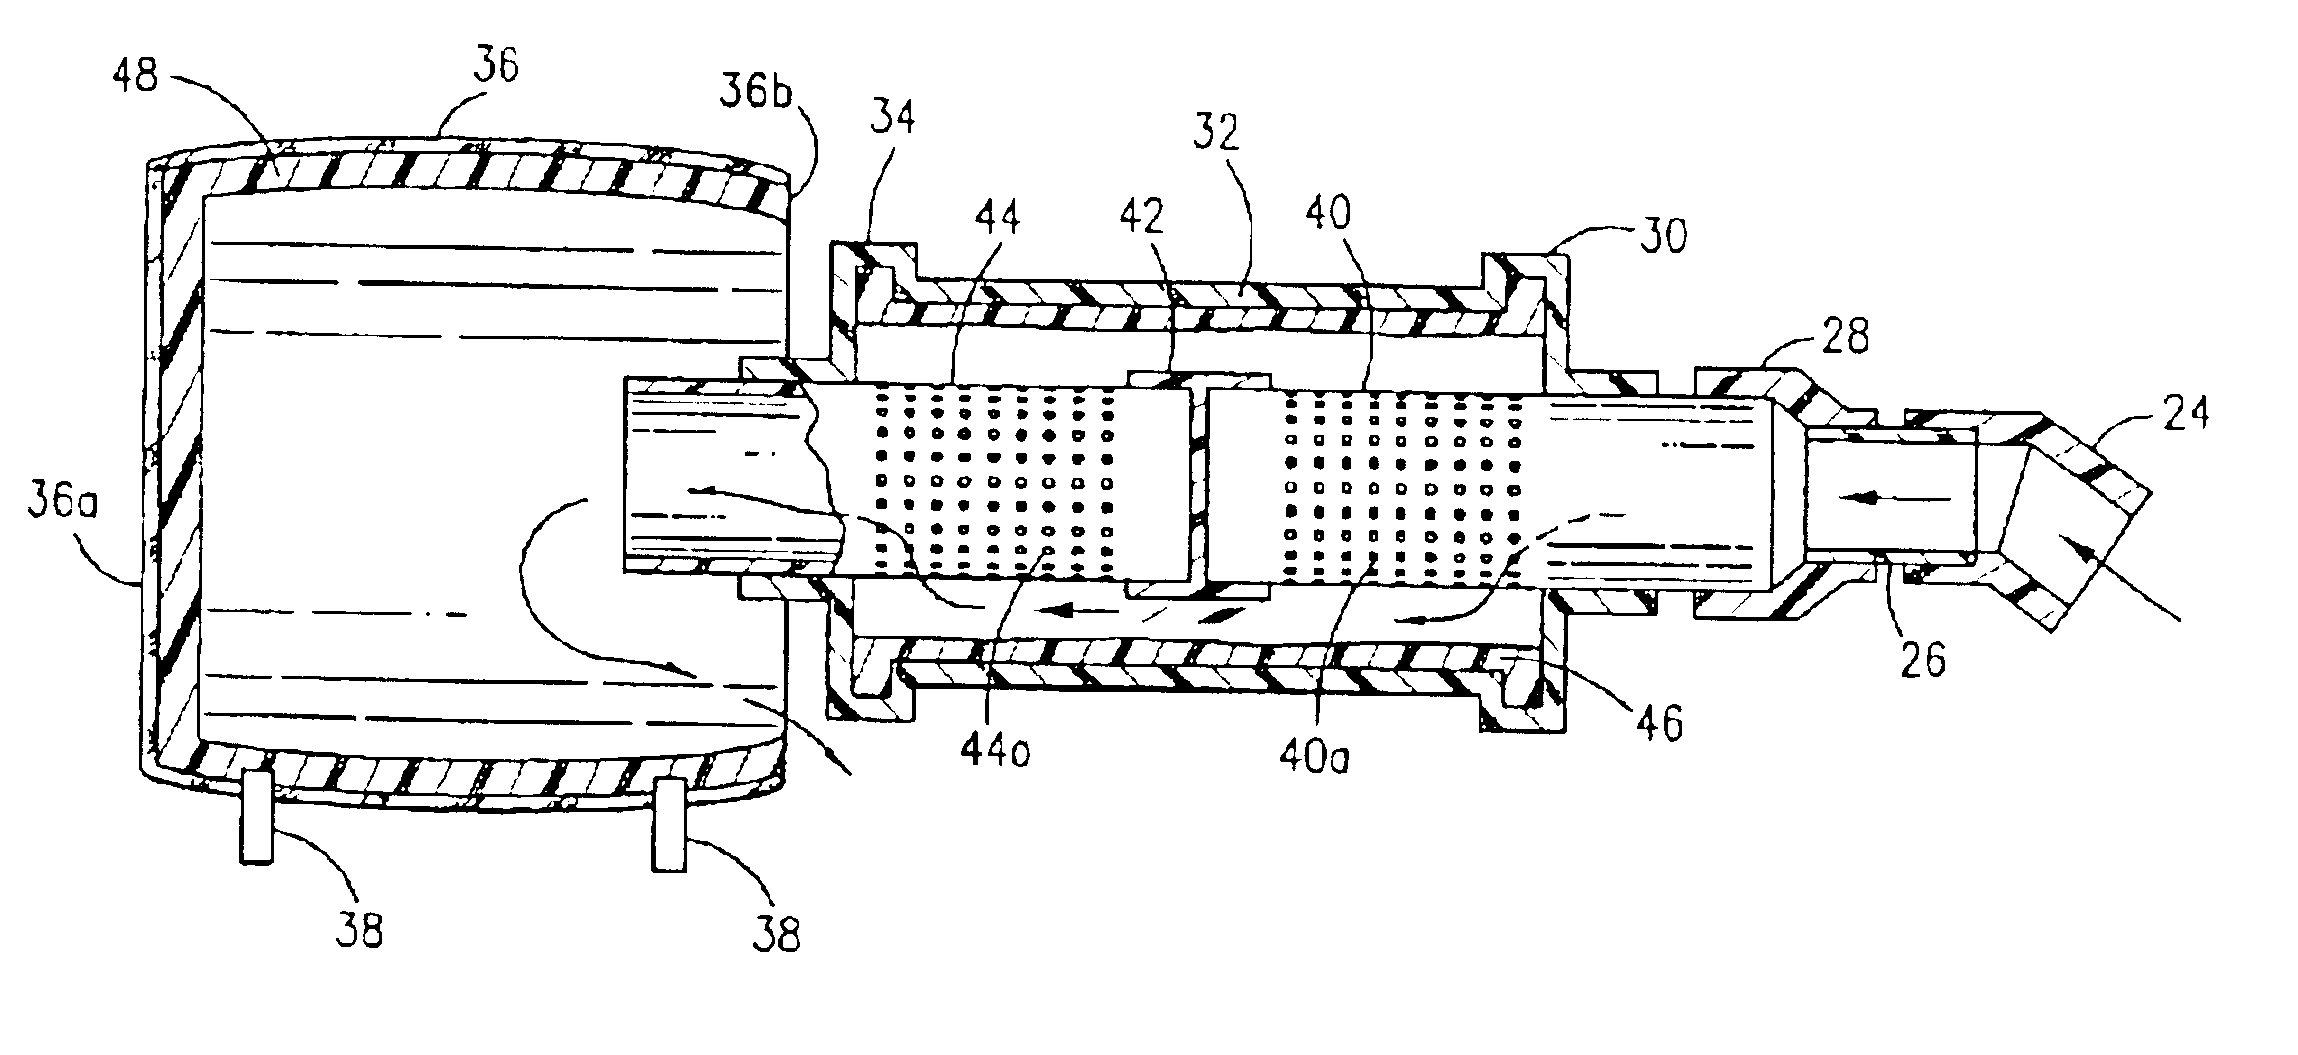 Muffler for suction system exhaust air used with an automatic cutting machine